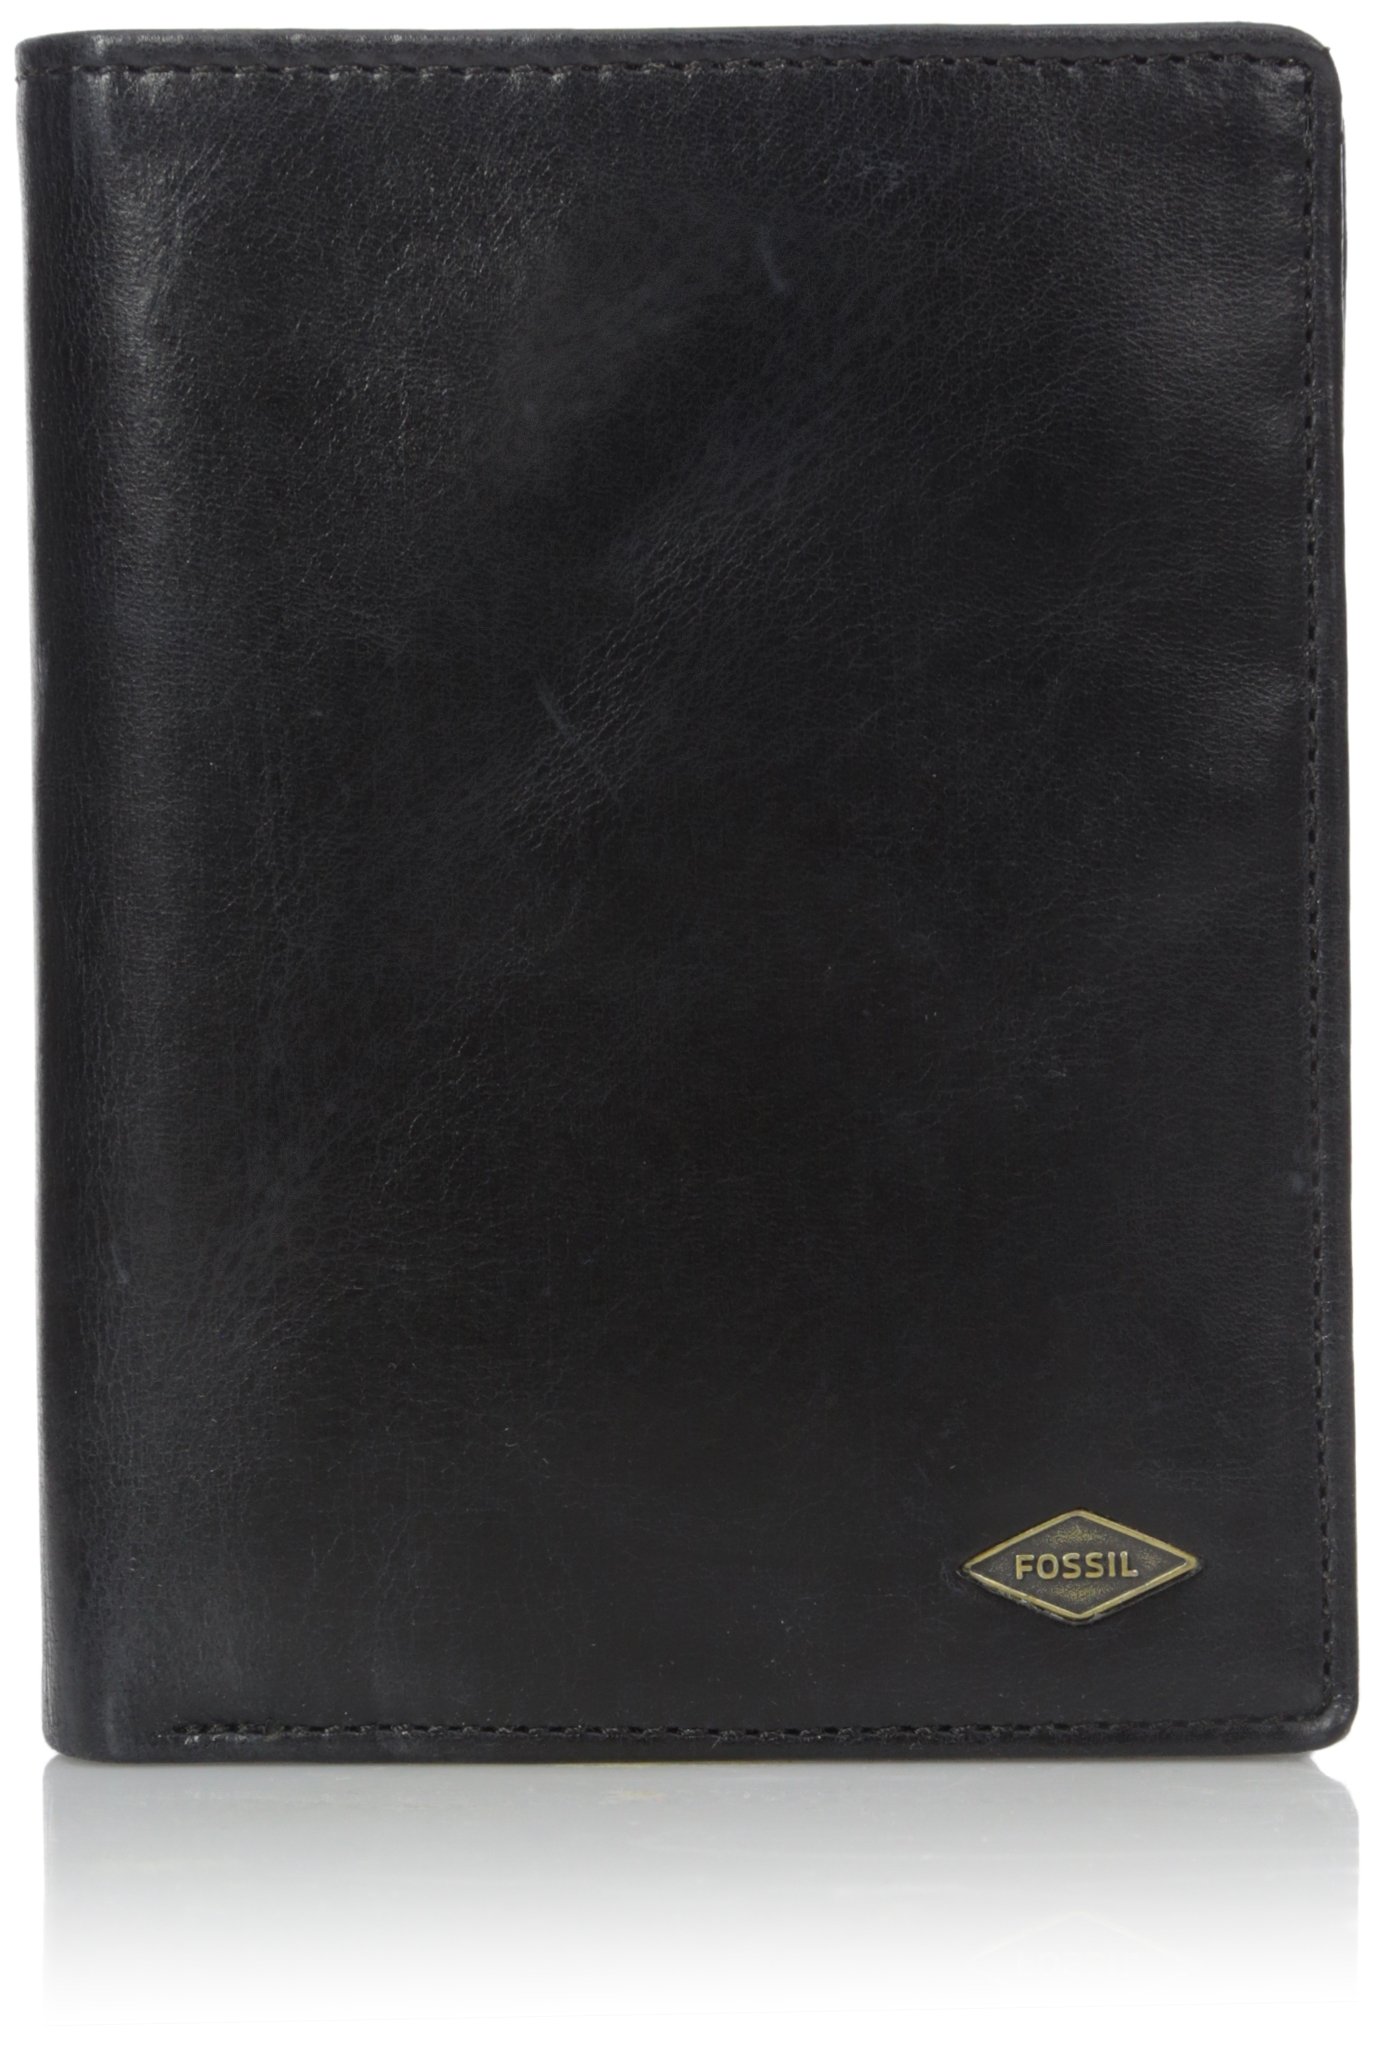 Fossil Men's RFID-Blocking Leather Large Capacity International Combination Bifold Wallet for Men